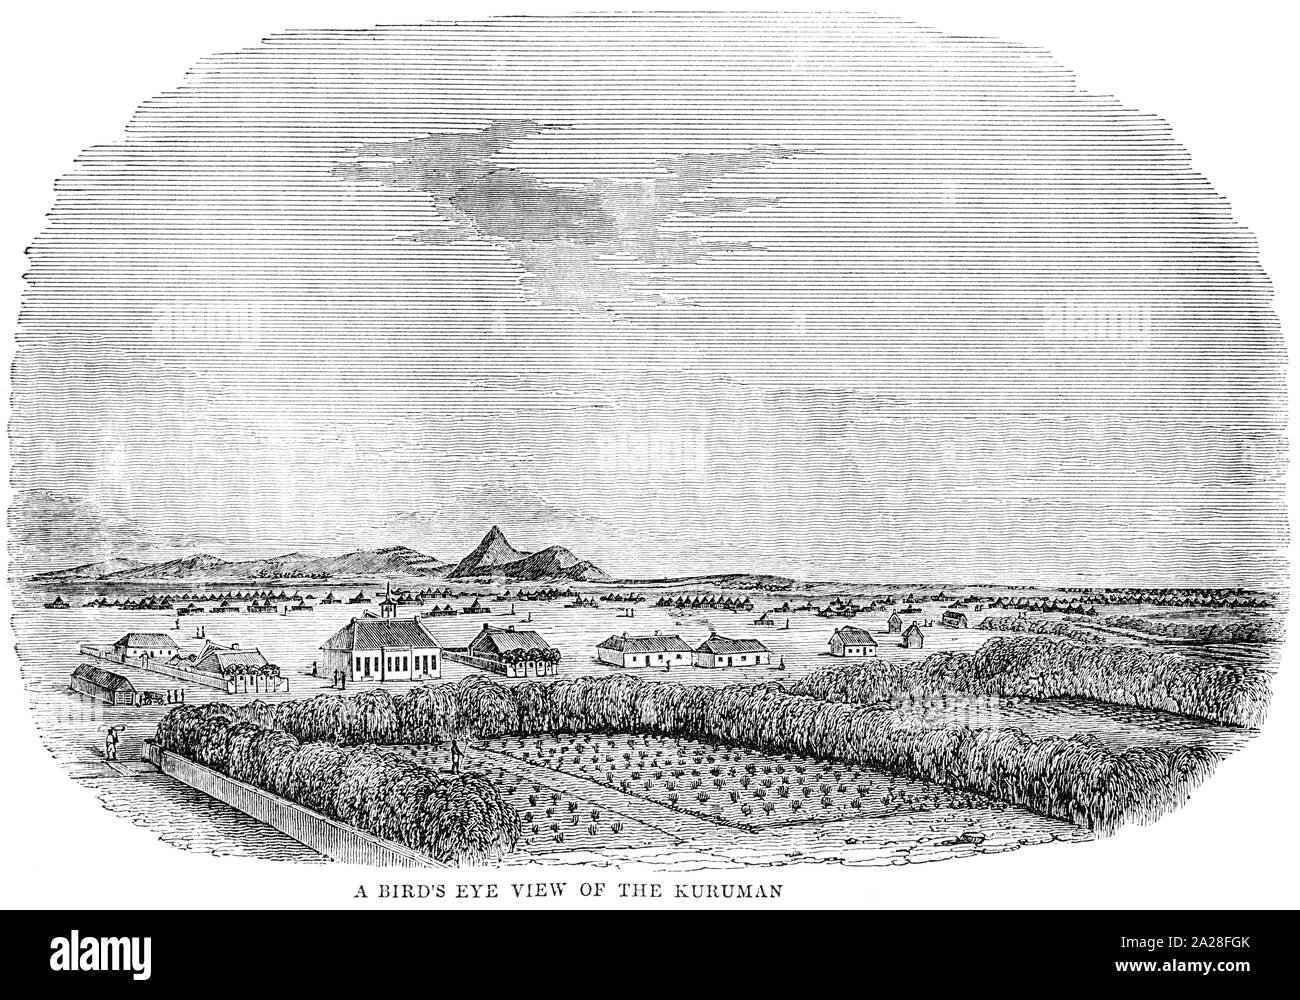 An illustration of a Bird's Eye View of the Kuruman in South Africa scanned at high resolution from a book by Robert Moffat  printed in 1842. Stock Photo